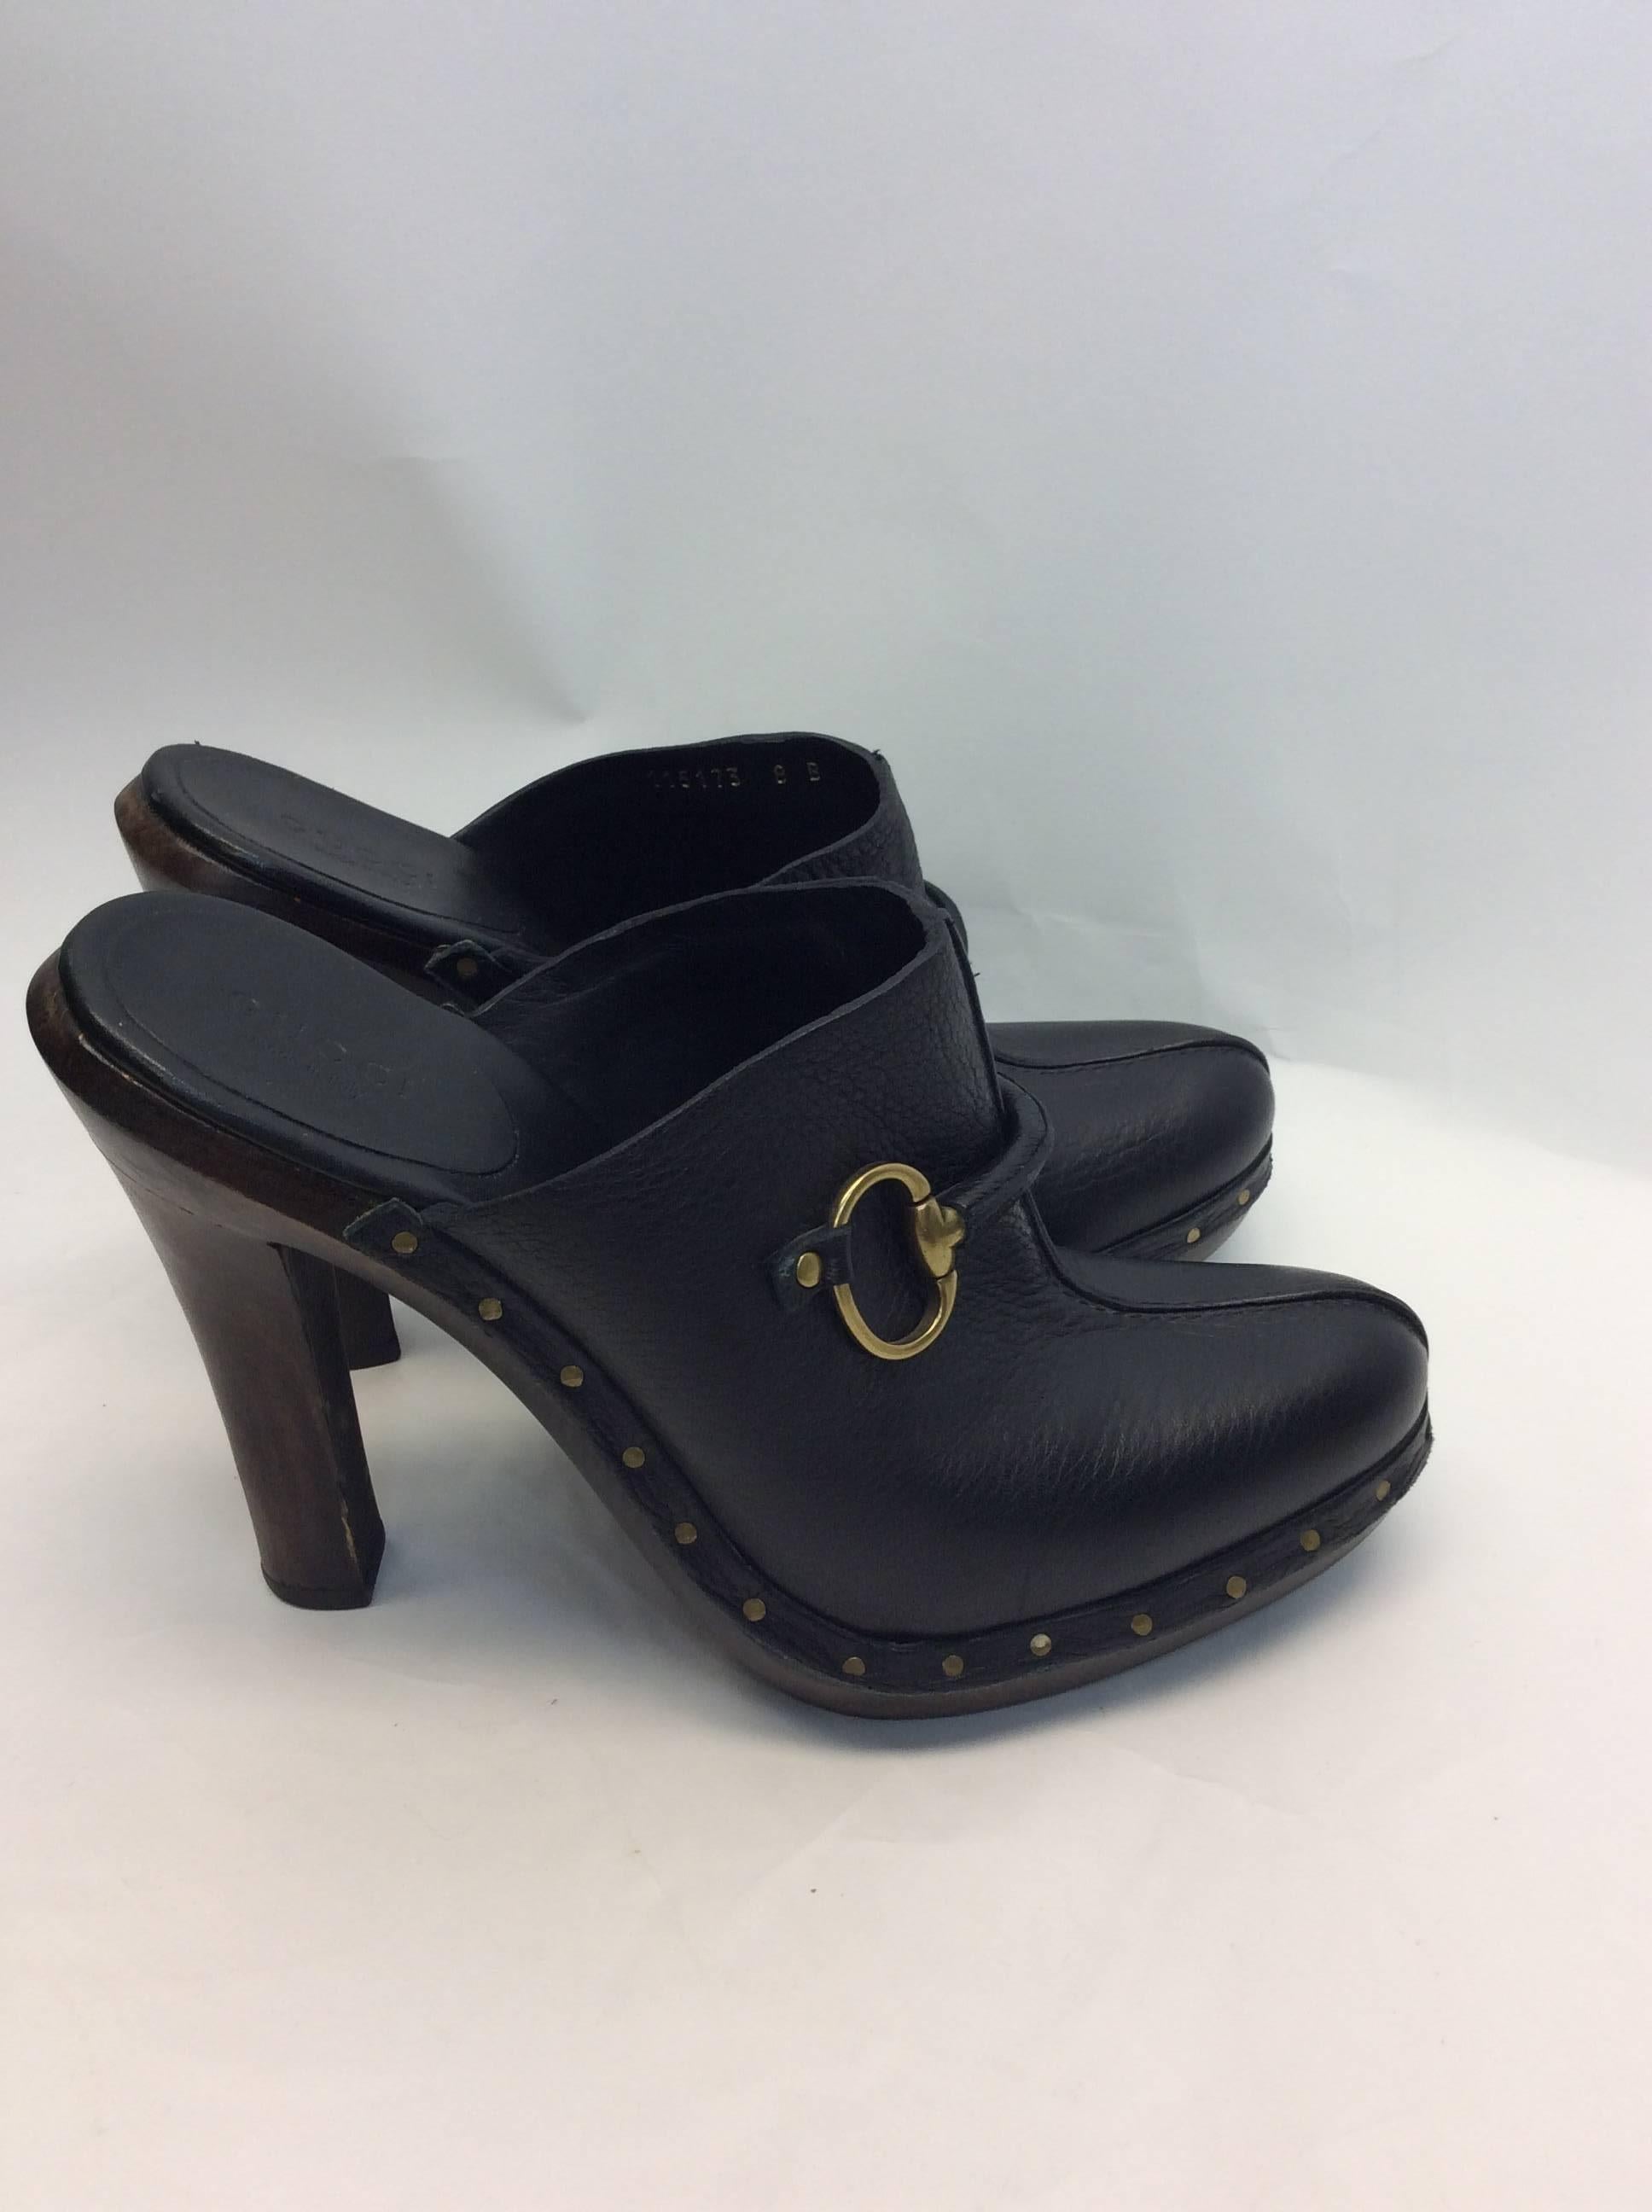 Gucci Black Leather Clog Heels
Size 8
Made in Italy
$150
Horsebit detail on the front
Wooden heel, stud trim